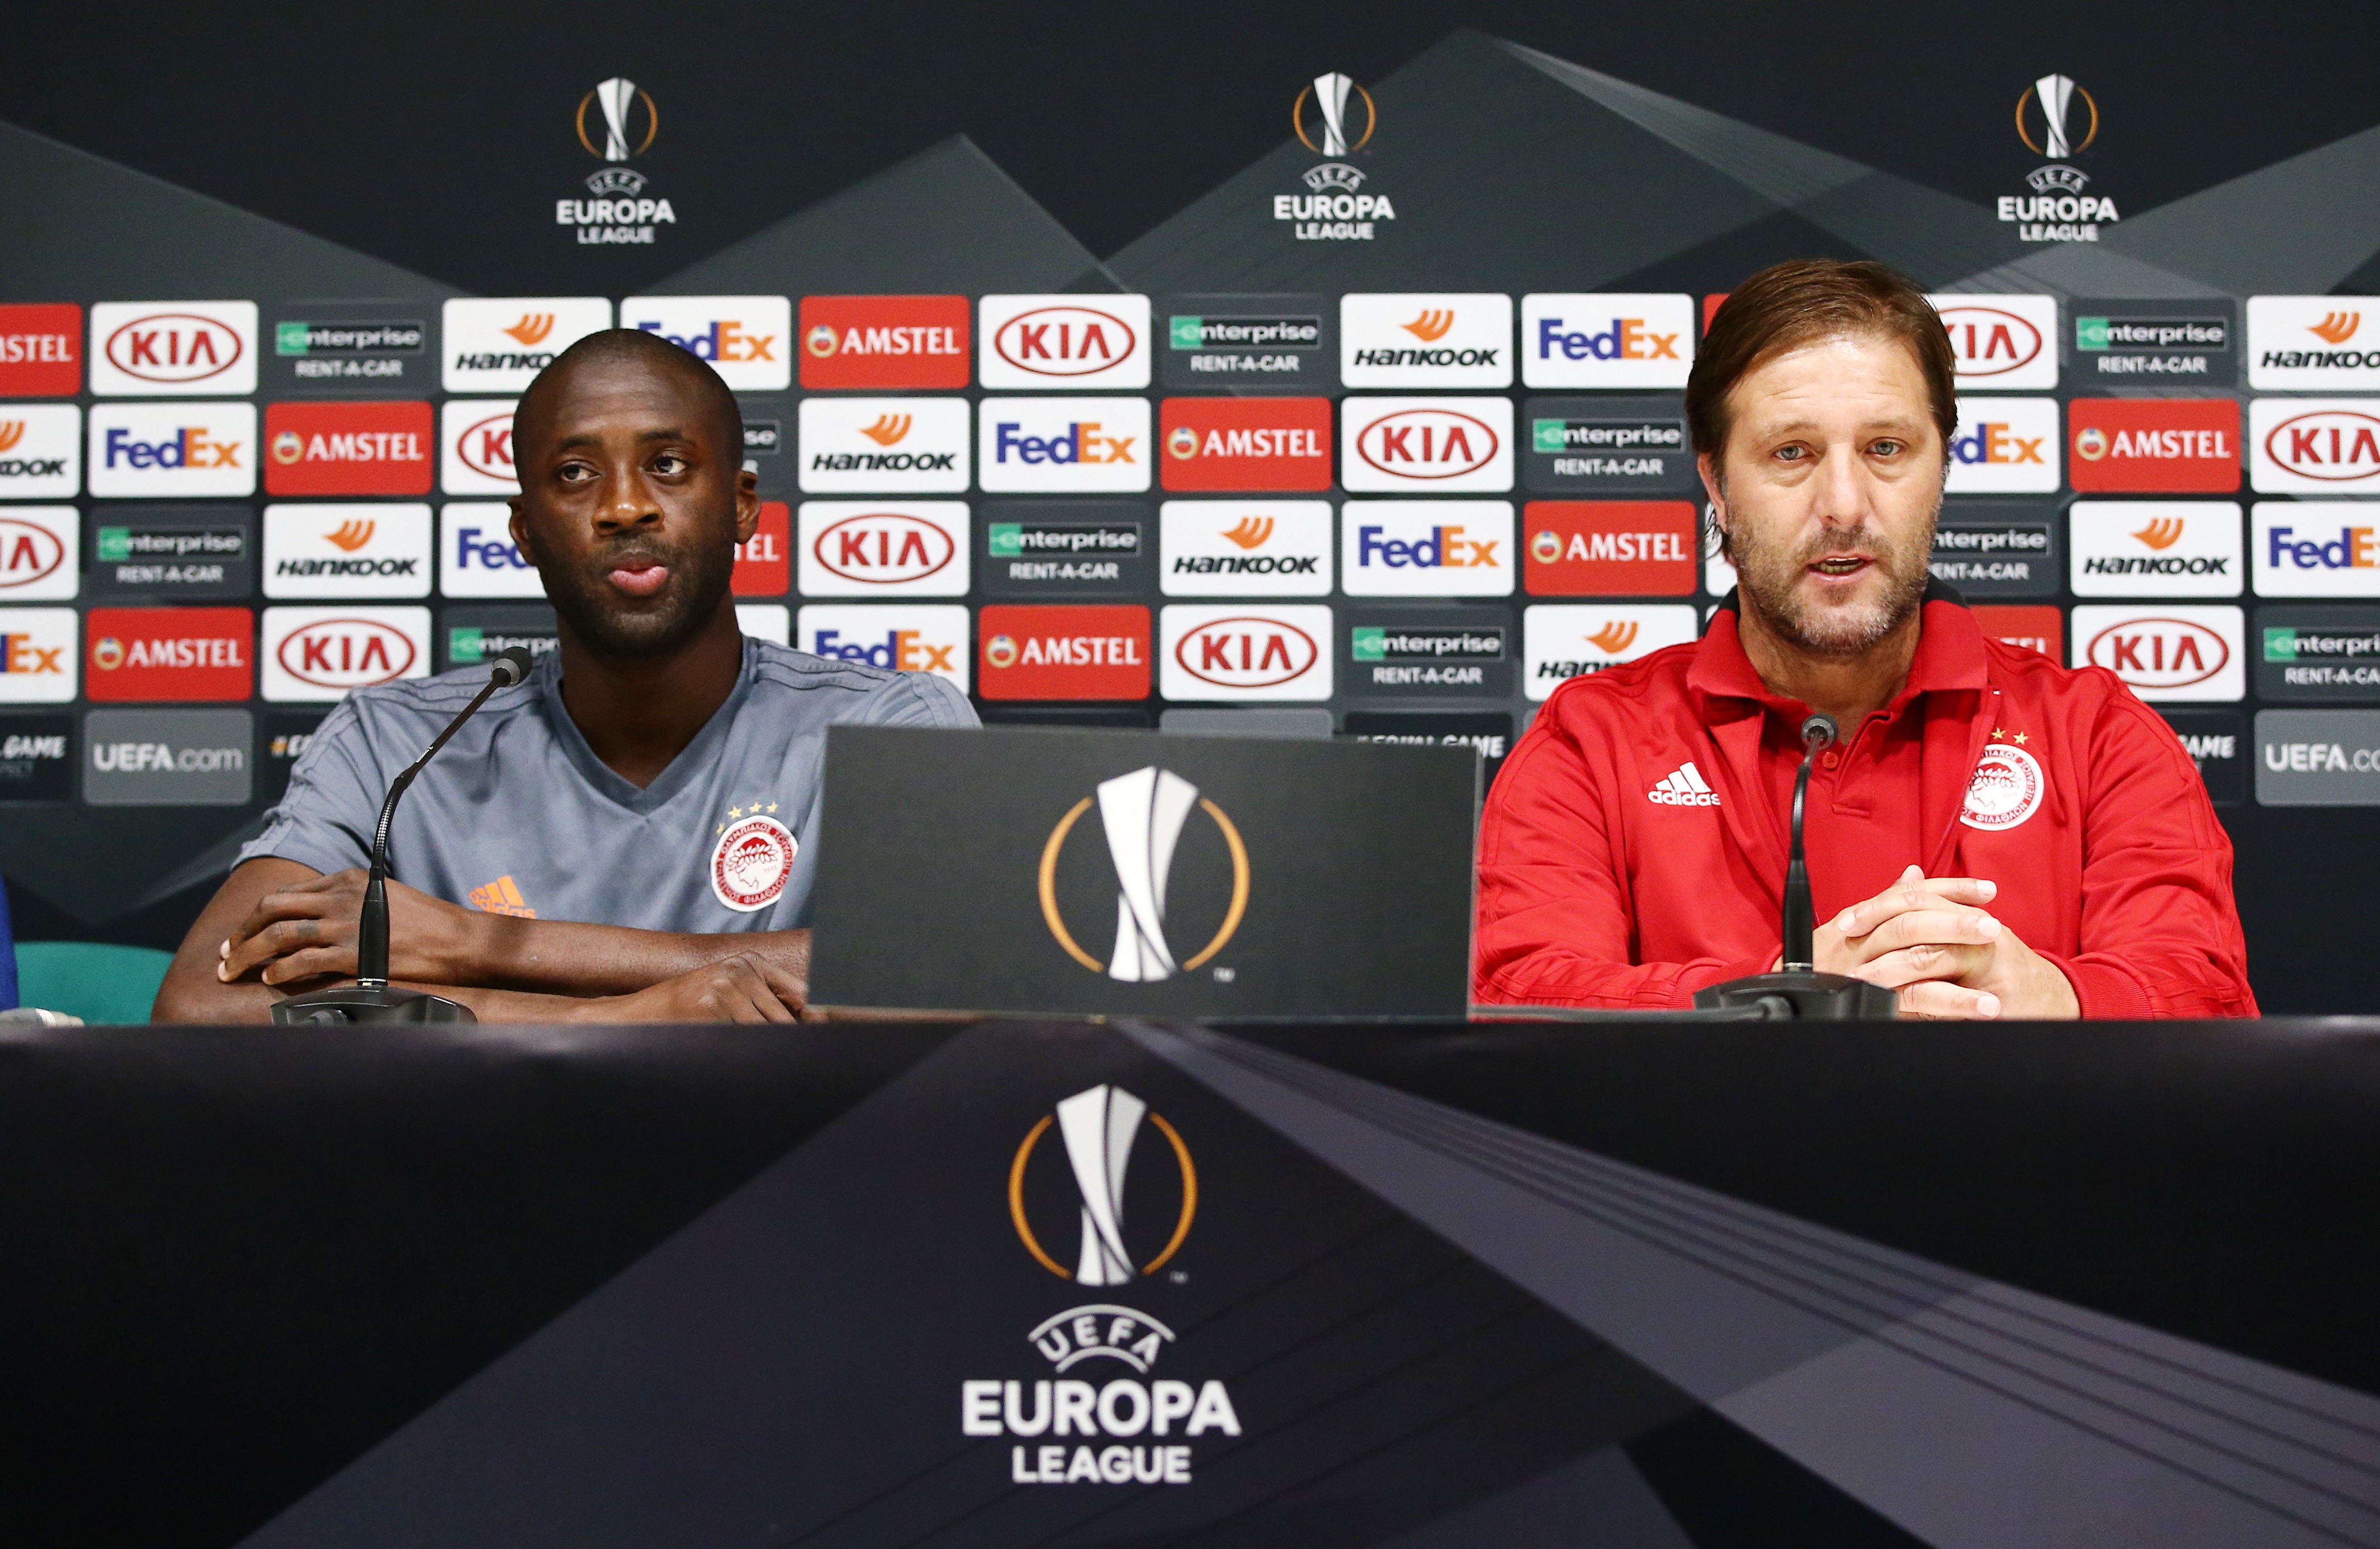 Press Conference ahead of the match vs Milan